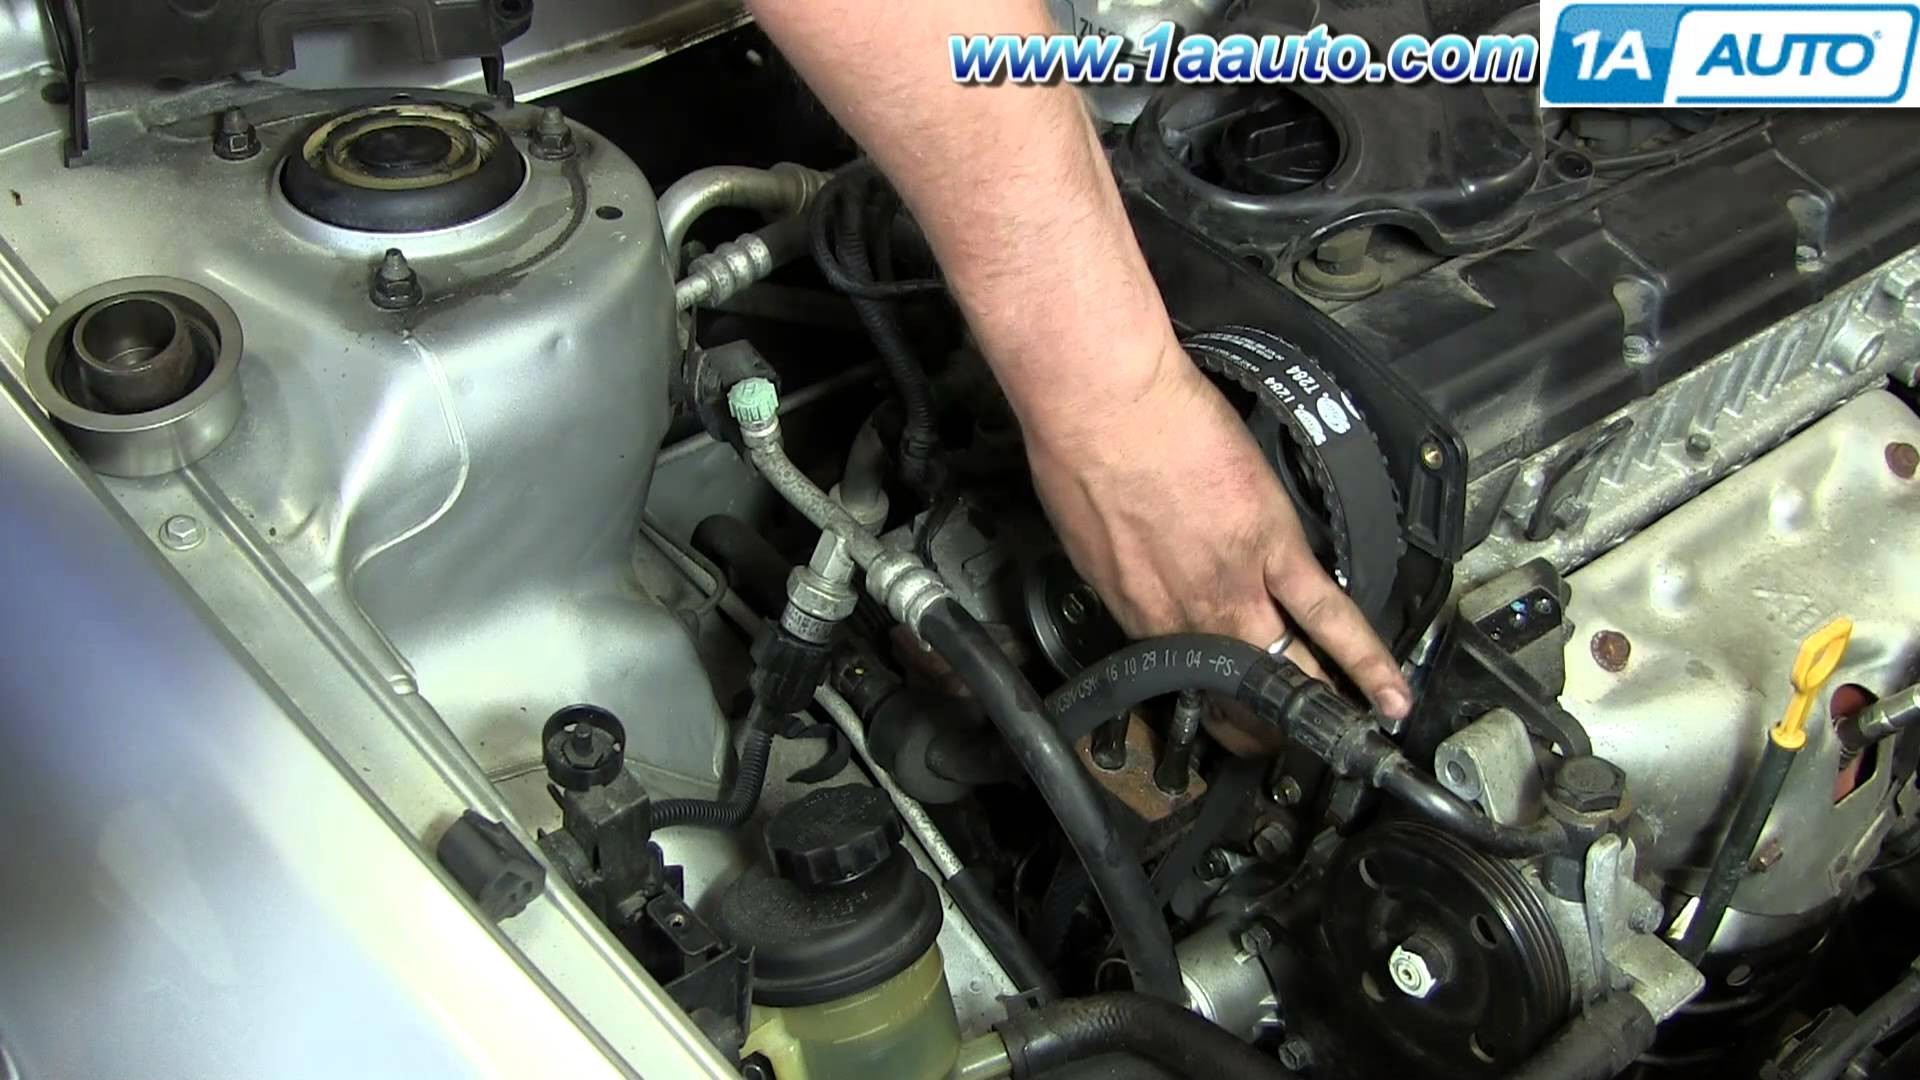 2004 Hyundai Accent Engine Diagram Part 2 How to Install Replace Timing Belt and Water Pump Hyundai Of 2004 Hyundai Accent Engine Diagram